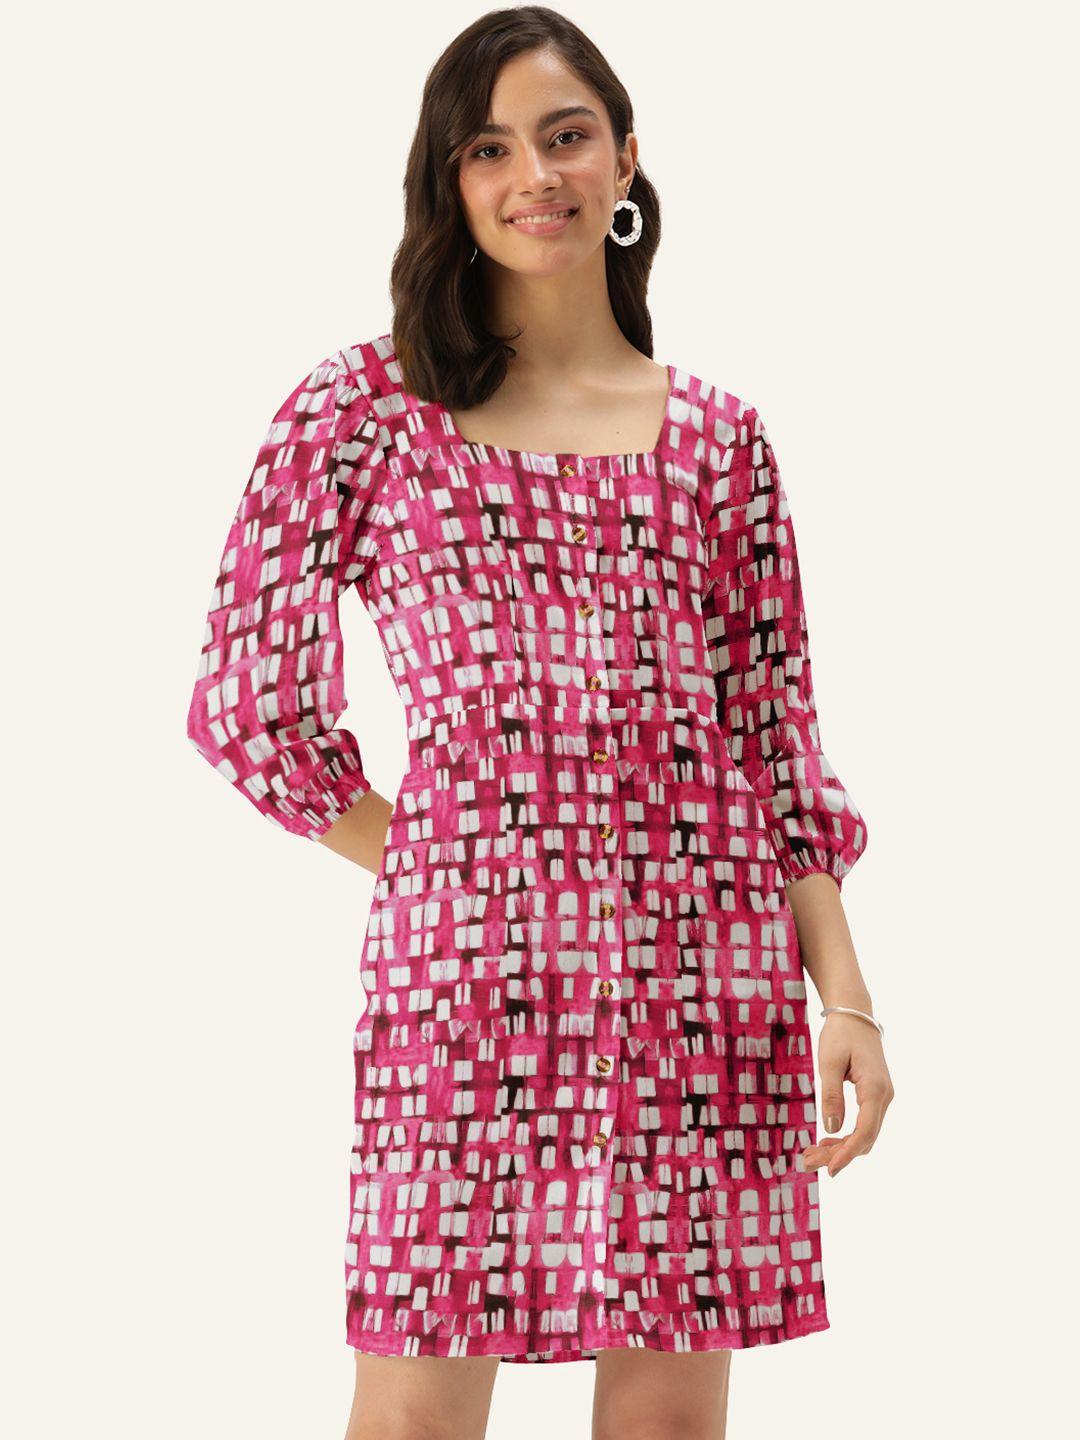 dressberry pink & white printed a-line dress